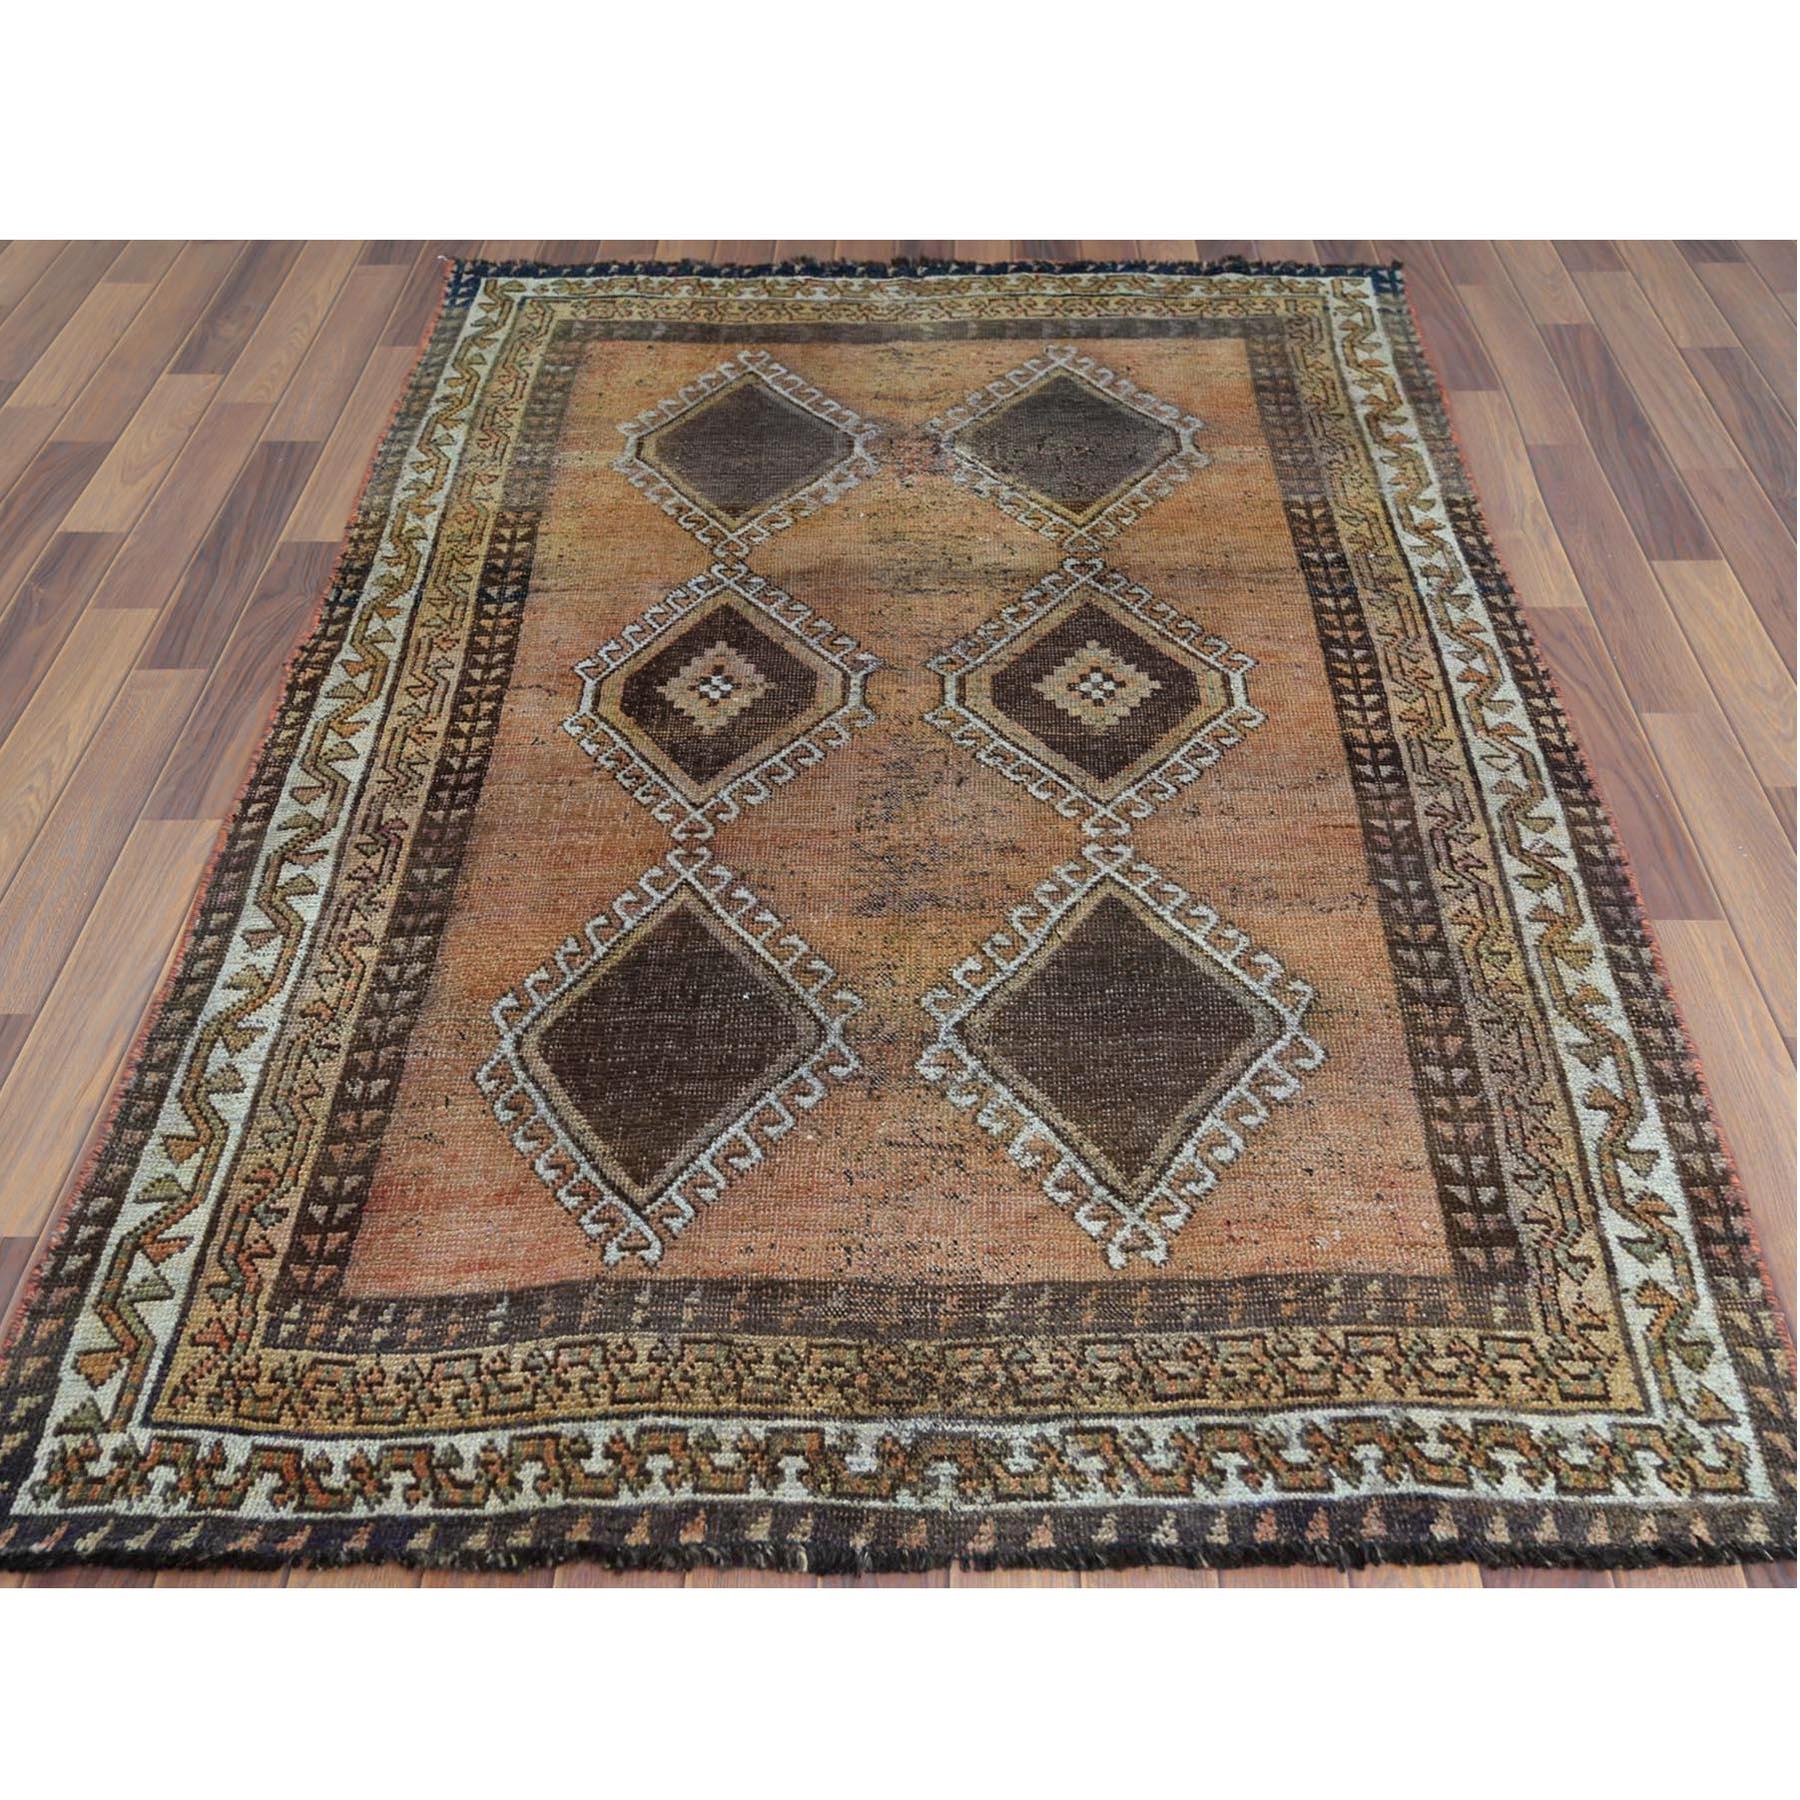 This fabulous hand-knotted carpet has been created and designed for extra strength and durability. This rug has been handcrafted for weeks in the traditional method that is used to make
Exact Rug Size in Feet and Inches : 4'8